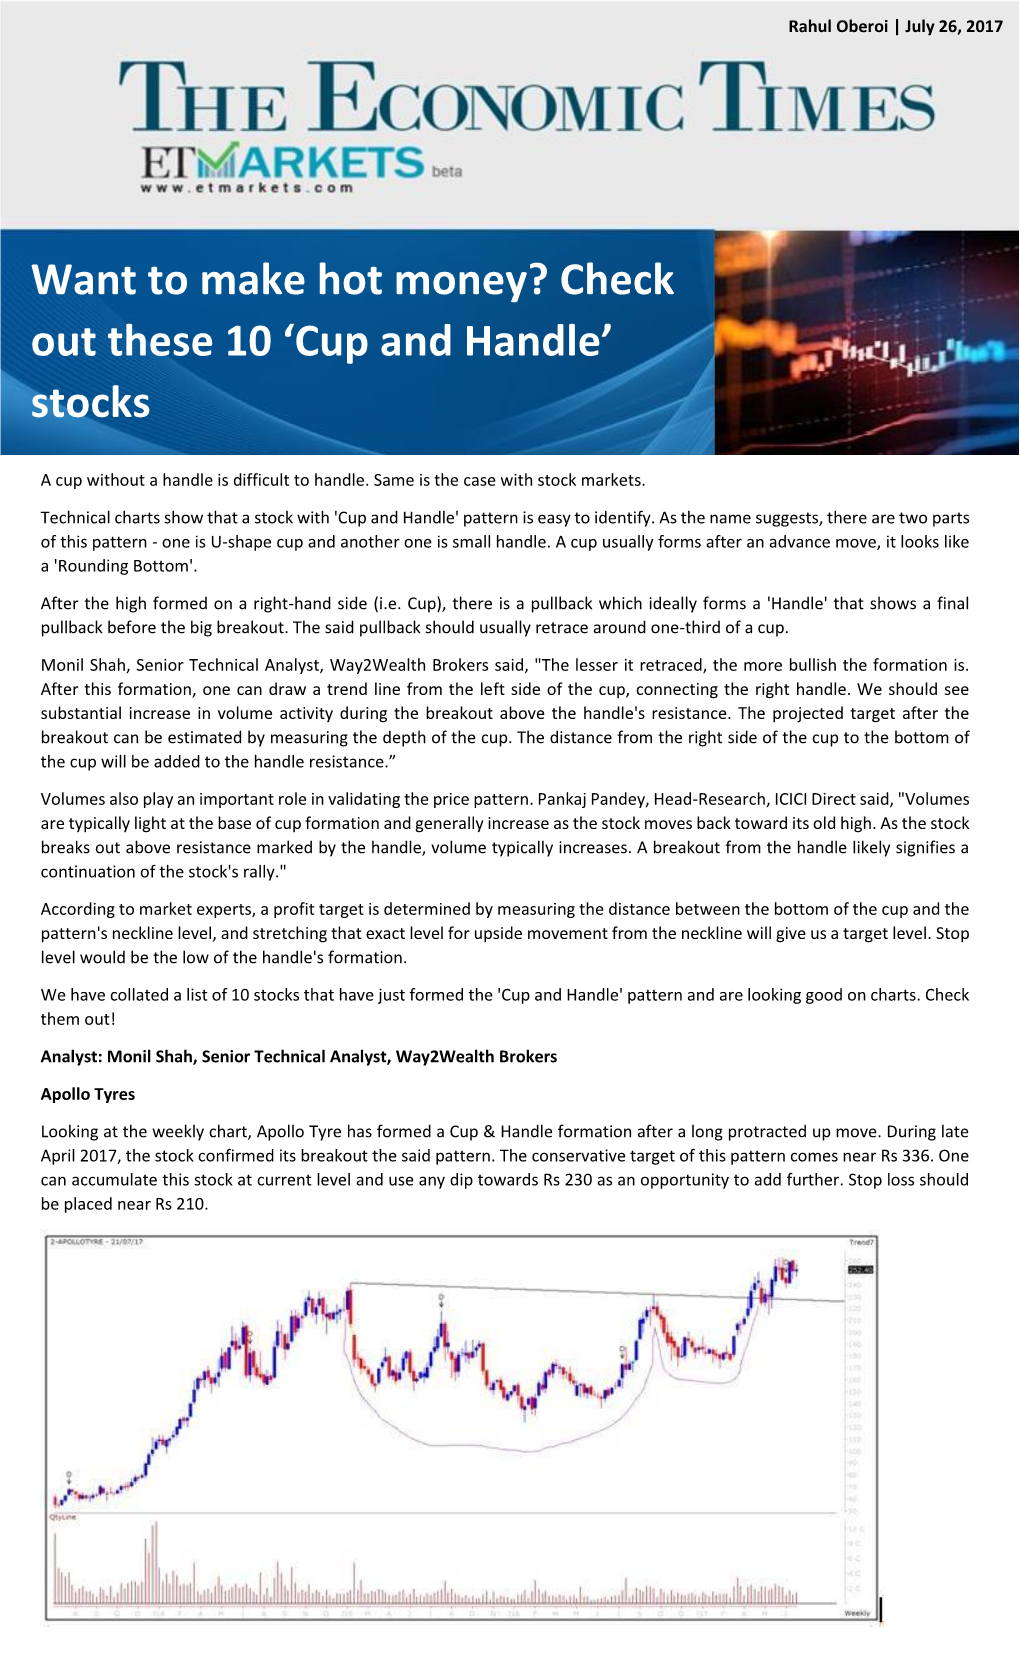 Want to Make Hot Money? Check out These 10 'Cup and Handle' Stocks